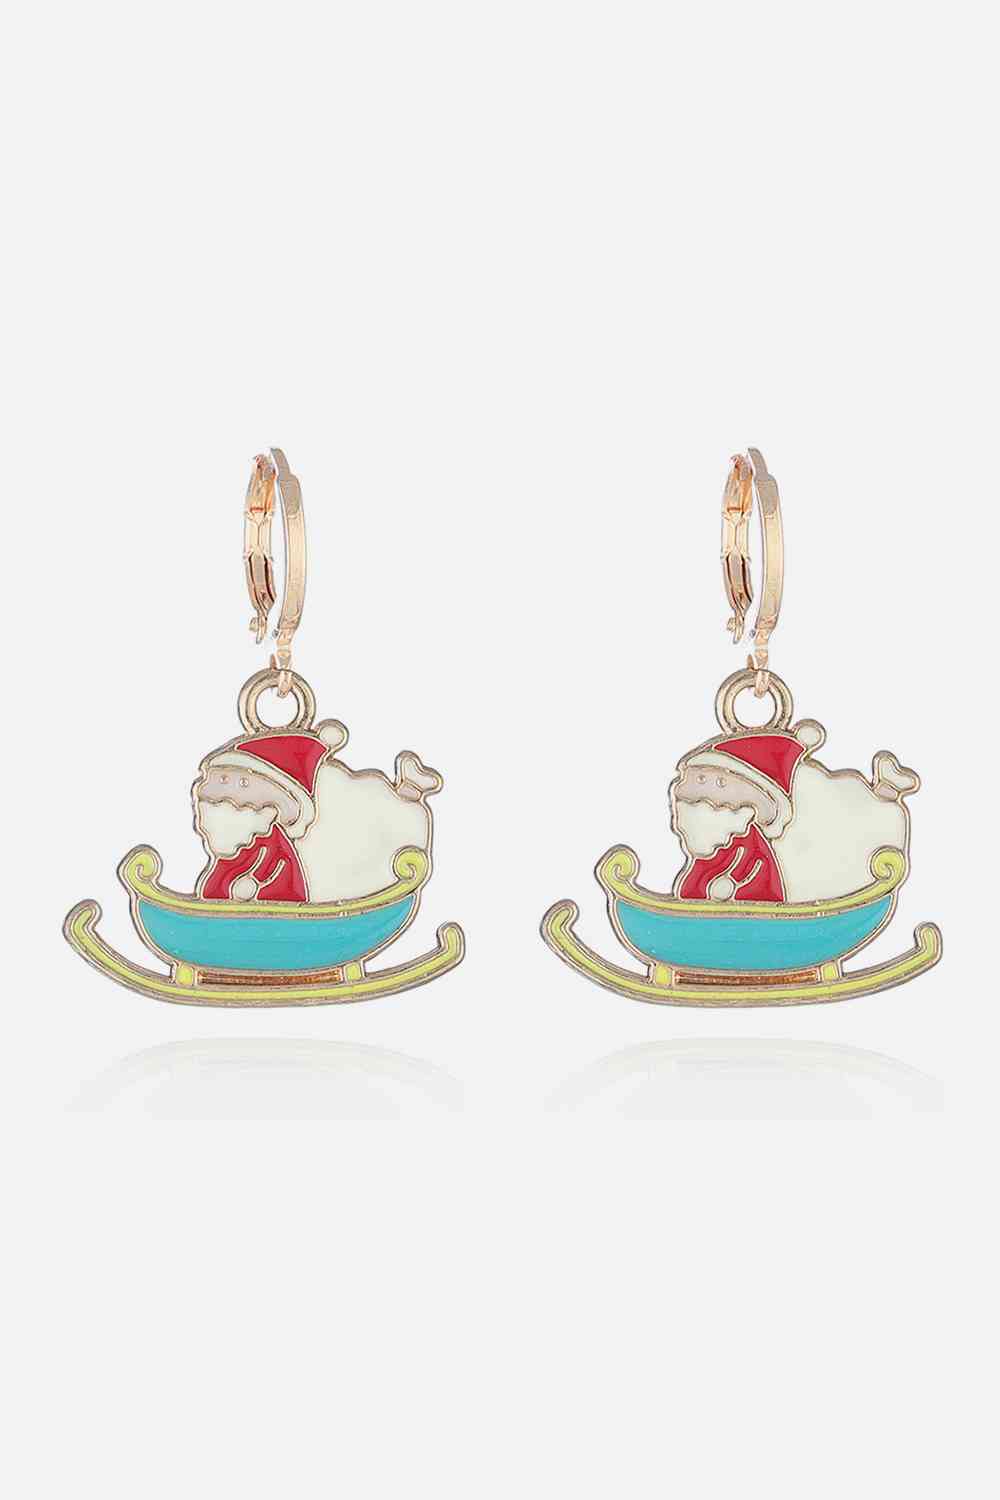 Christmas Theme Alloy Earrings - Kawaii Stop - Alloy earrings, Celebration earrings, Christmas, Christmas earrings, Christmas fashion, Christmas gifts, Christmas outfit, Elegant earrings, Festive accessories, Holiday glam, Holiday jewelry, Holiday party accessories, Holiday season, Ship From Overseas, Sparkling jewelry, Stylish earrings, Y.Q@Jew